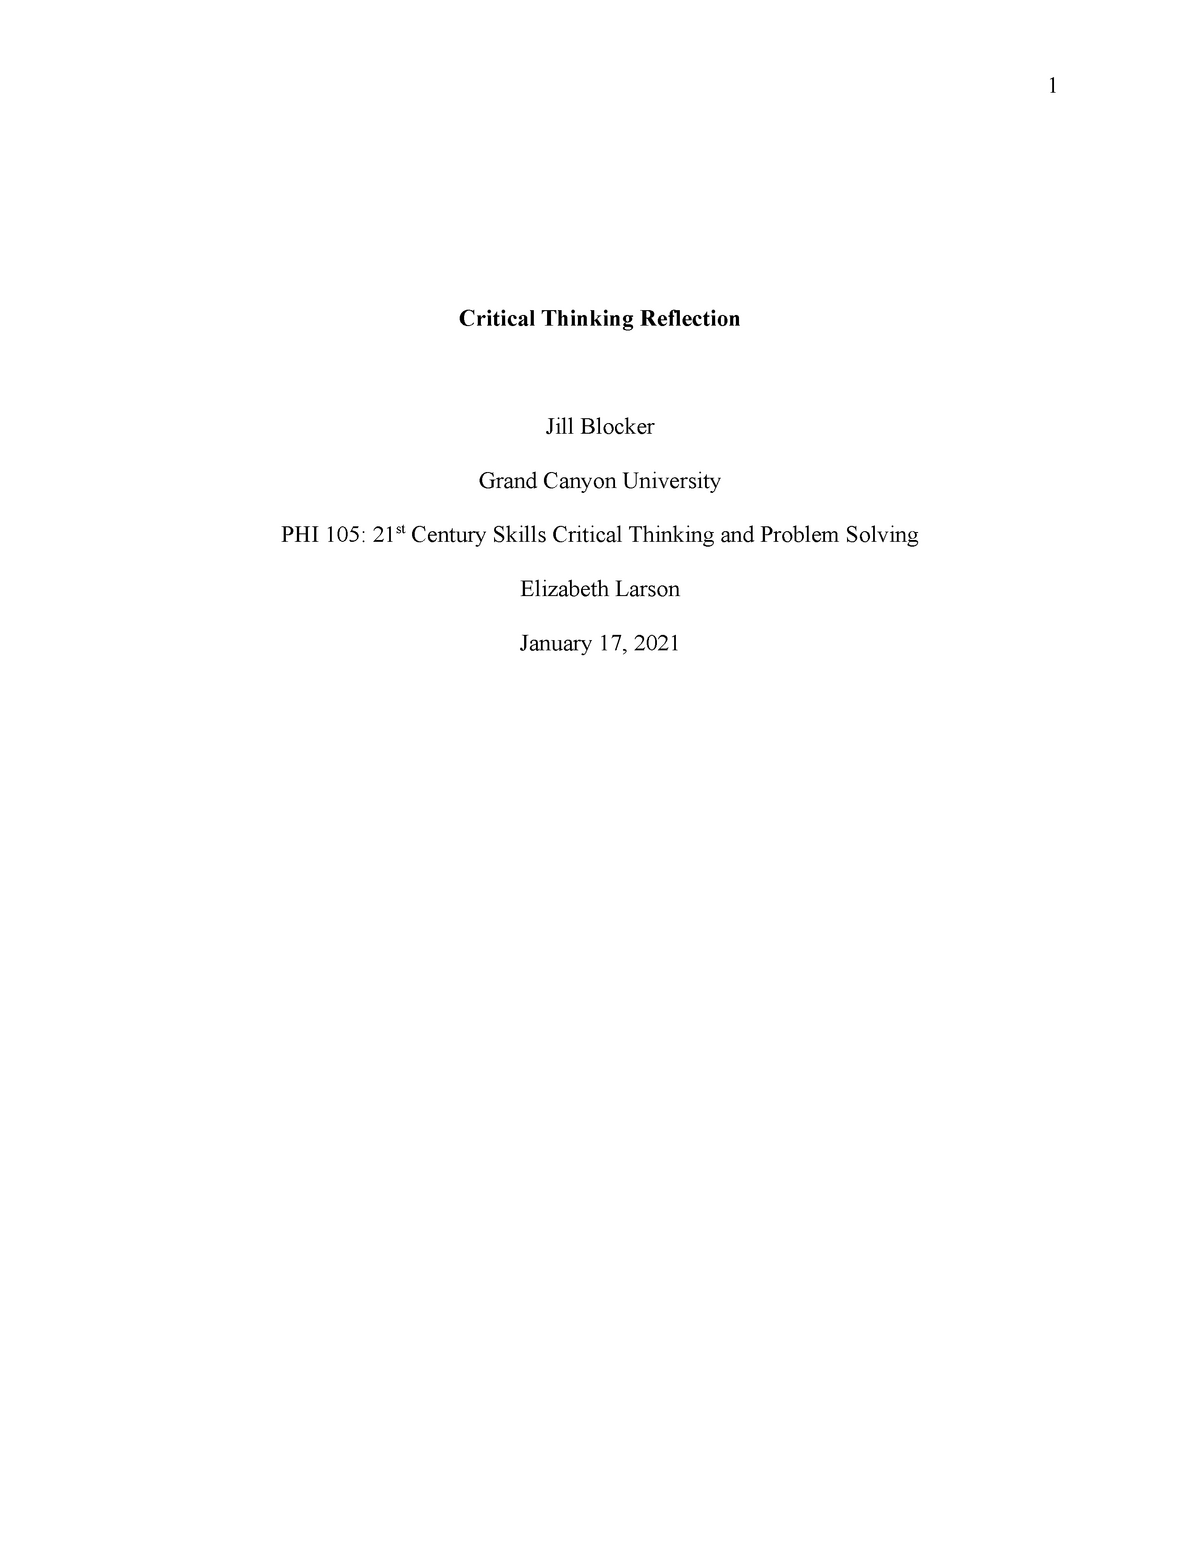 reflection paper about critical thinking